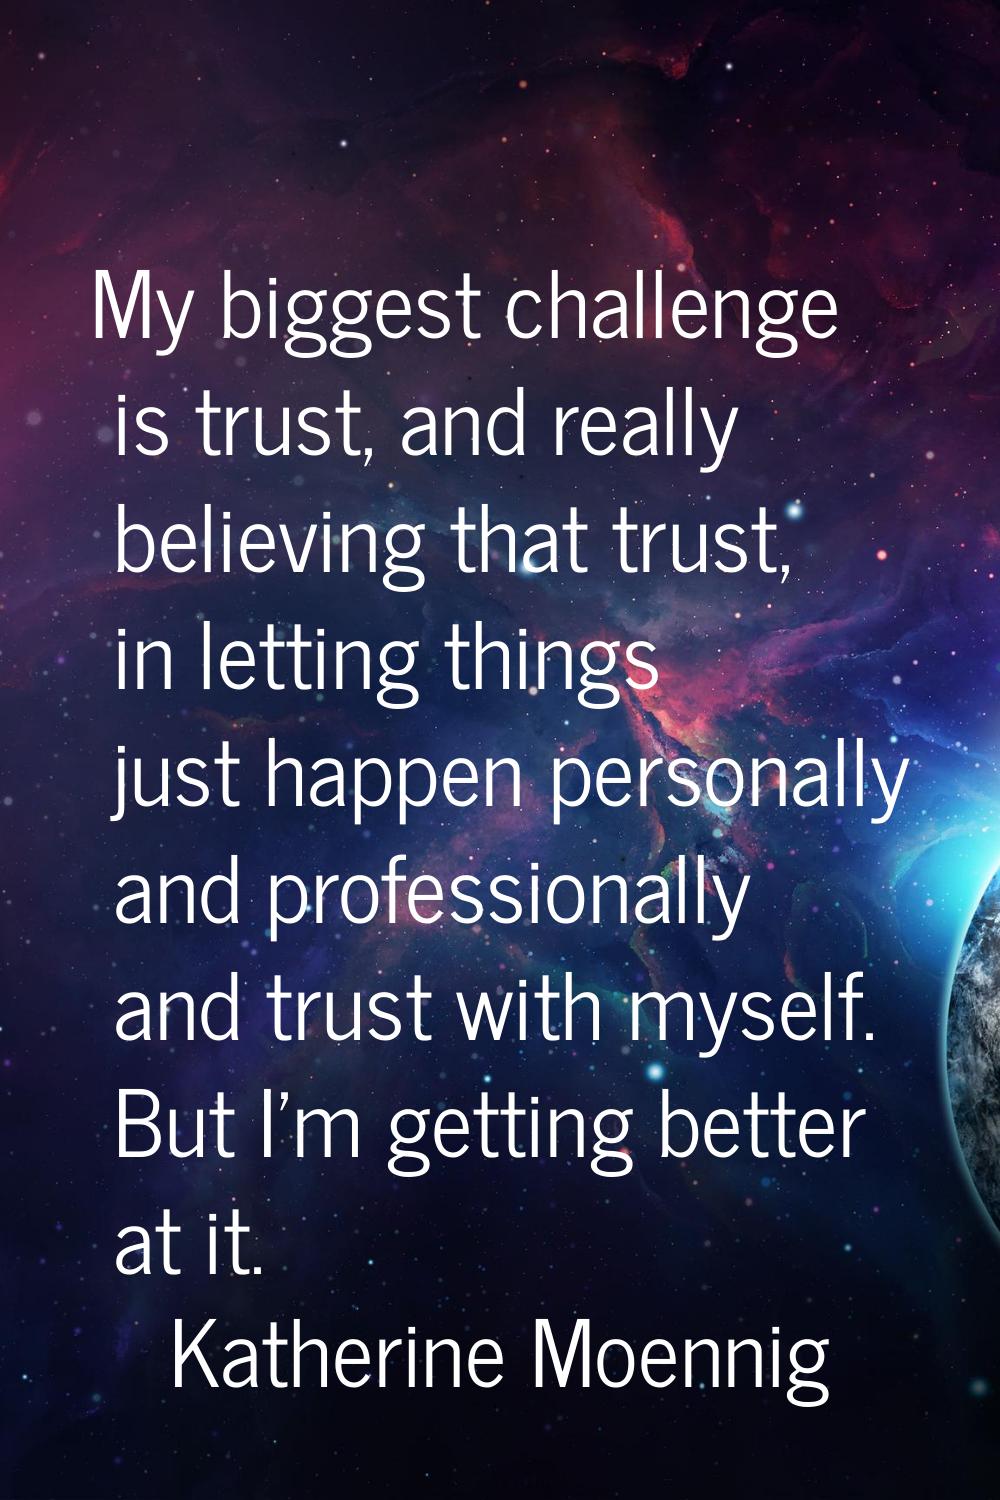 My biggest challenge is trust, and really believing that trust, in letting things just happen perso